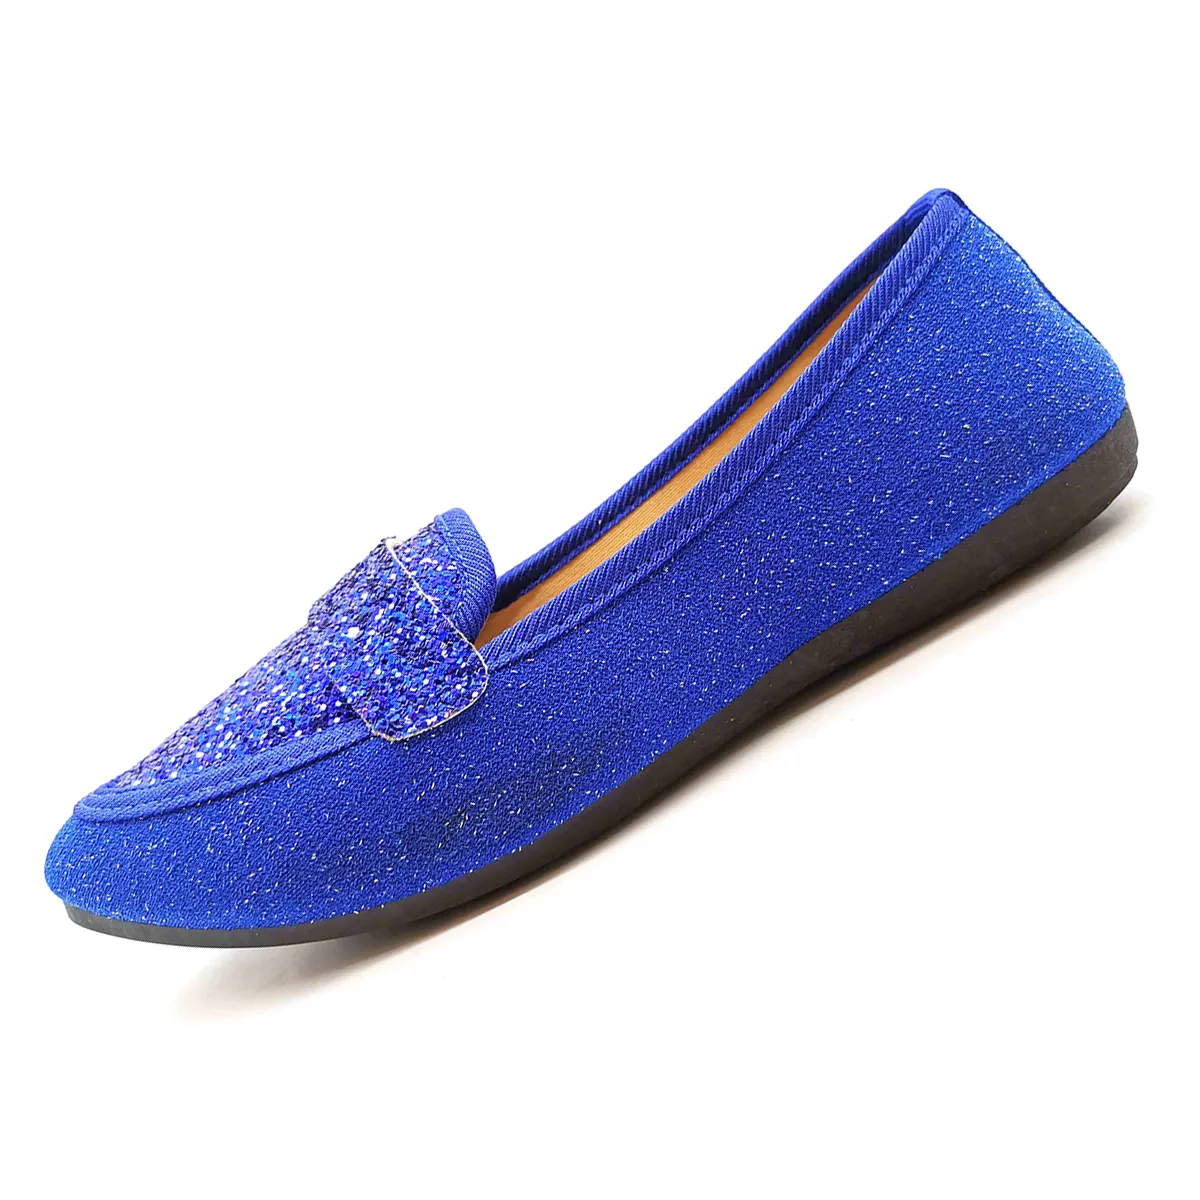 Womens Customized Ballerinas Cheap Price Flat Shoes Casual Pumps Collection Free Samples are available